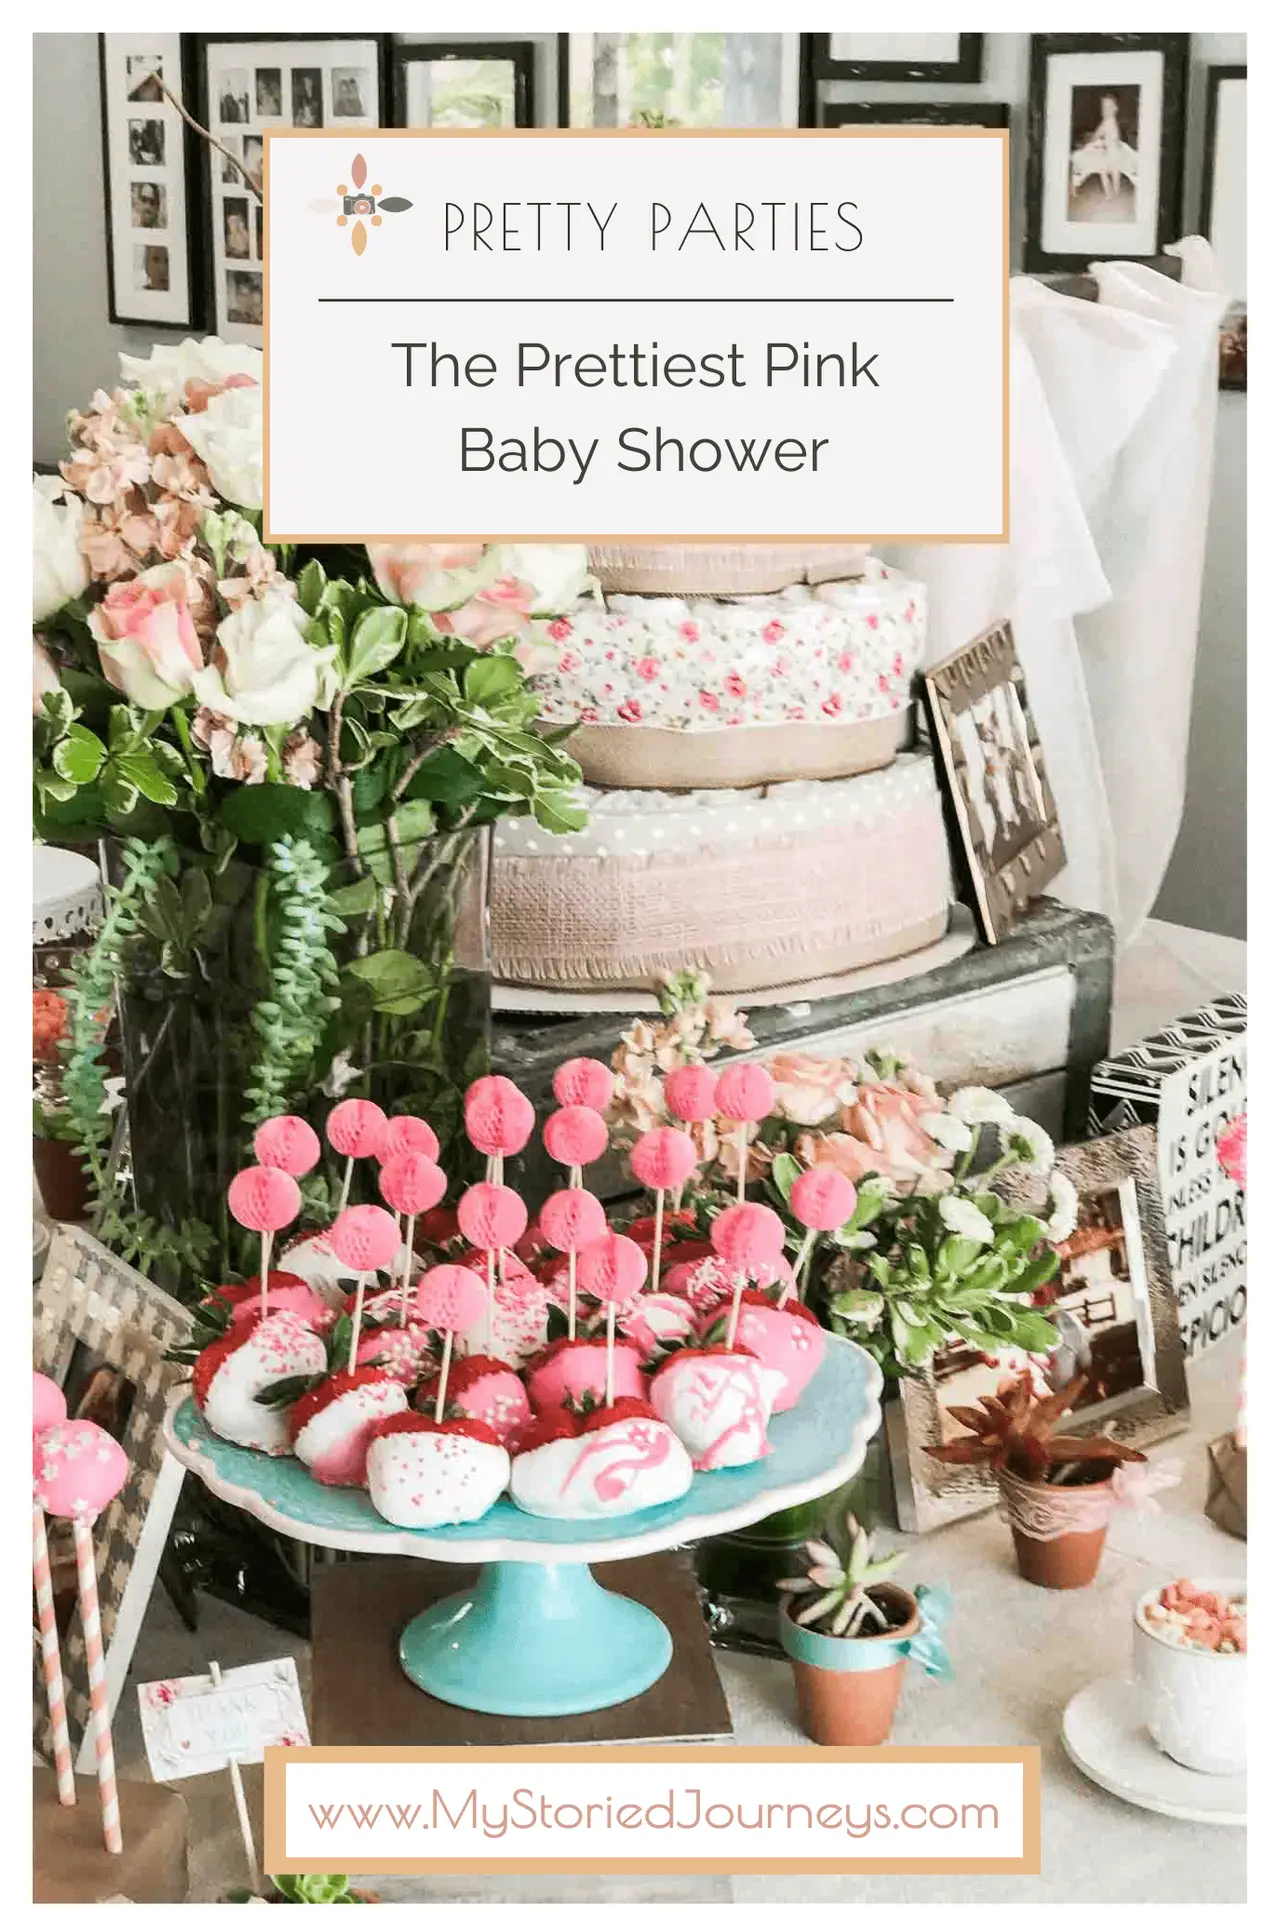 The Prettiest Pink Baby Shower